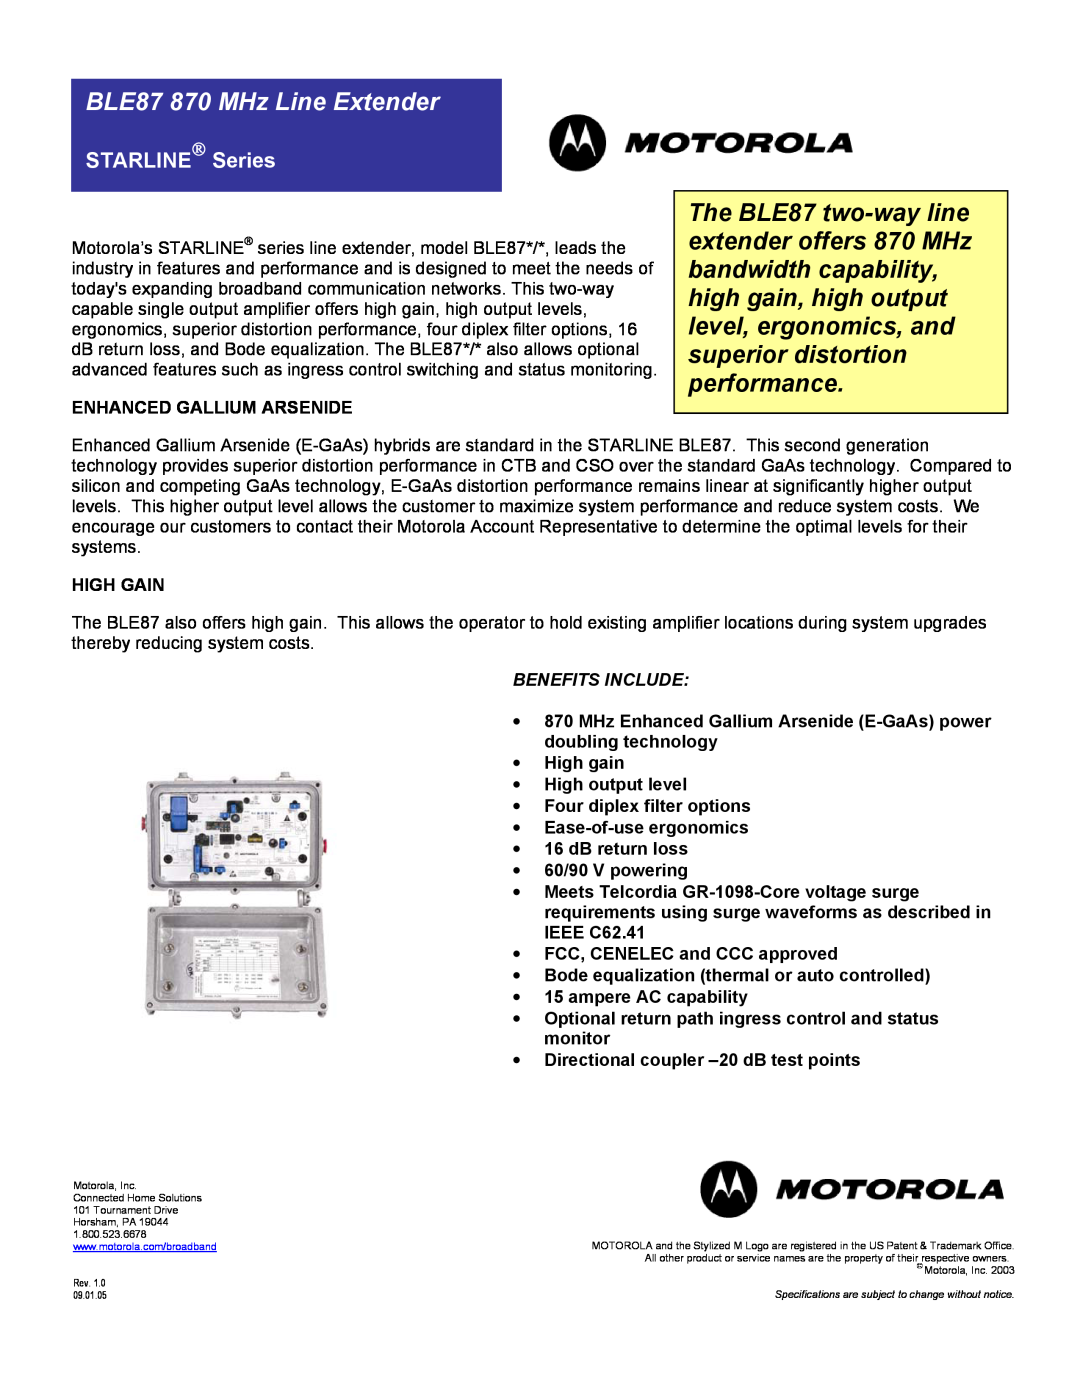 Motorola BLE87 specifications STARLINE Series, Enhanced Gallium Arsenide, High Gain, FCC, CENELEC and CCC approved 